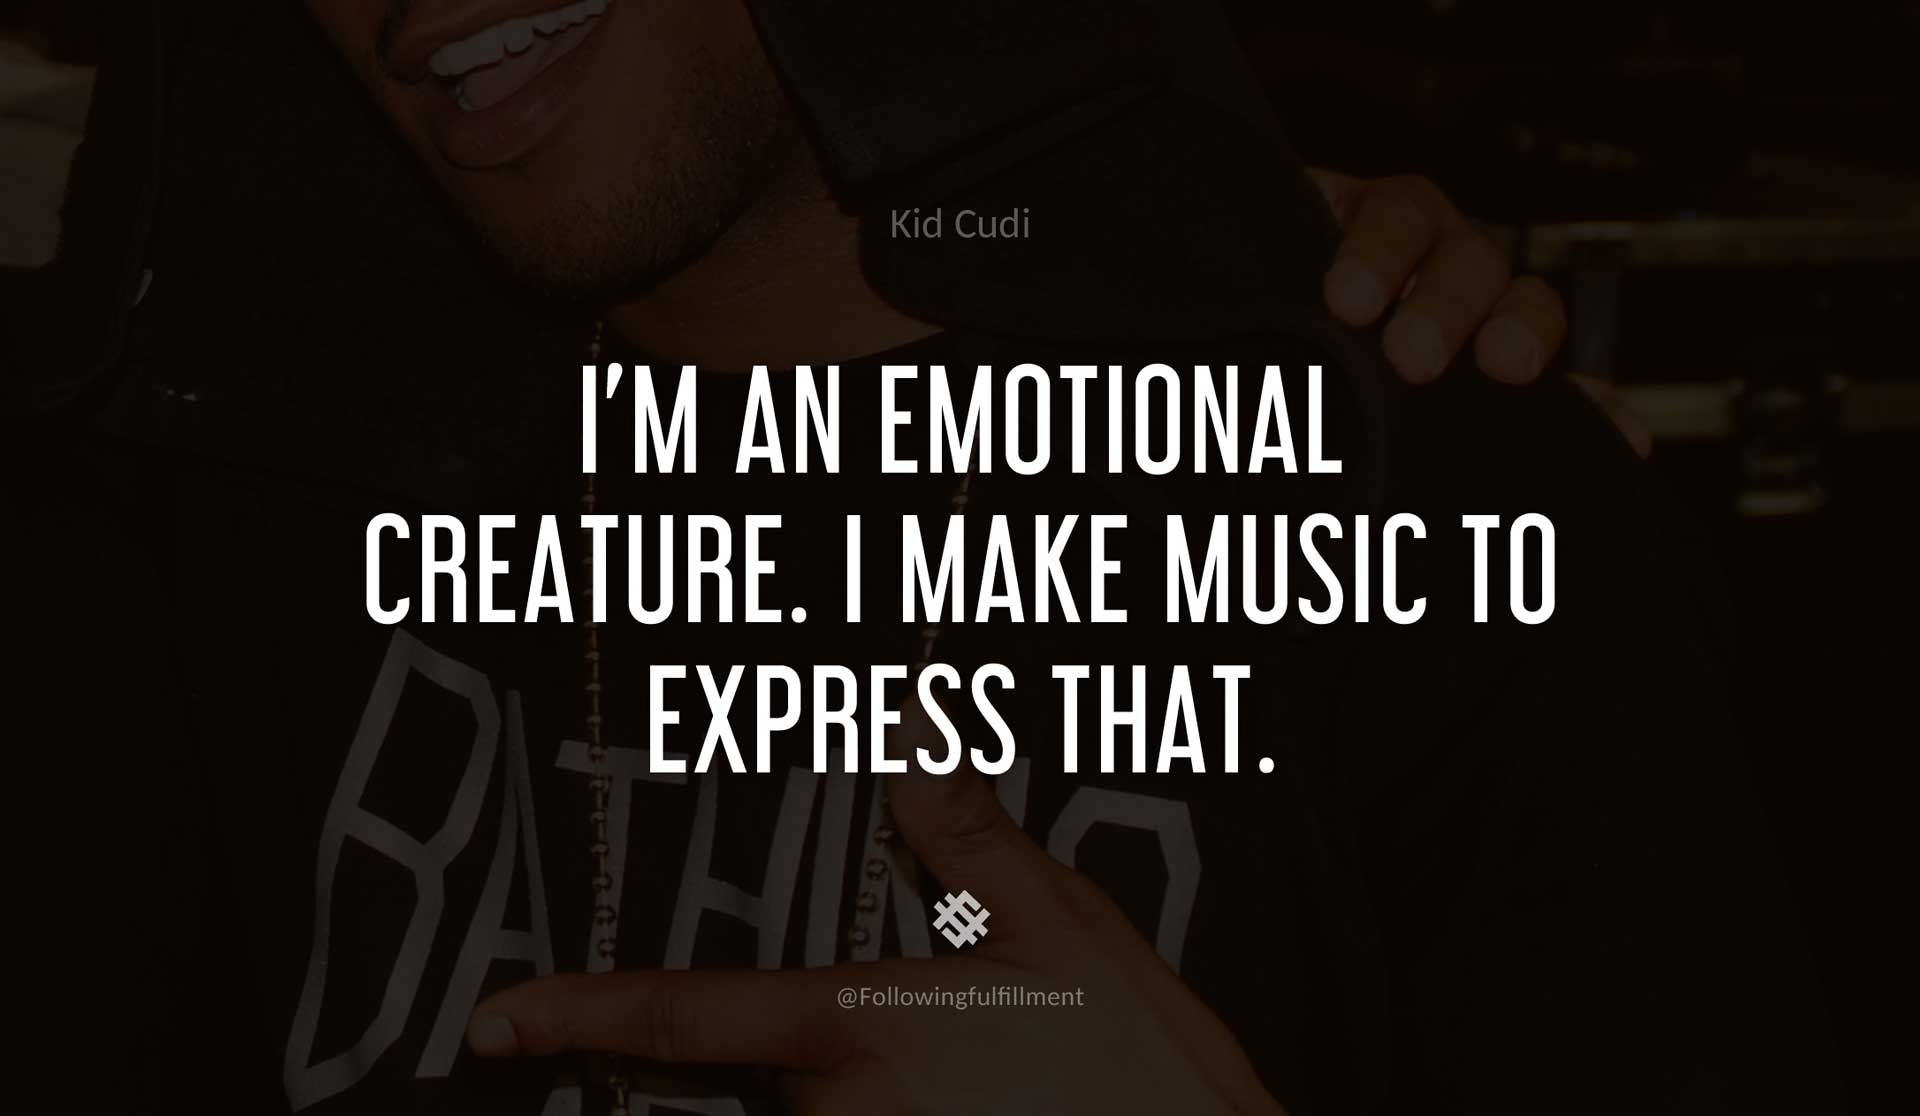 I'm-an-emotional-creature.-I-make-music-to-express-that.-KID-CUDI-Quote.jpg